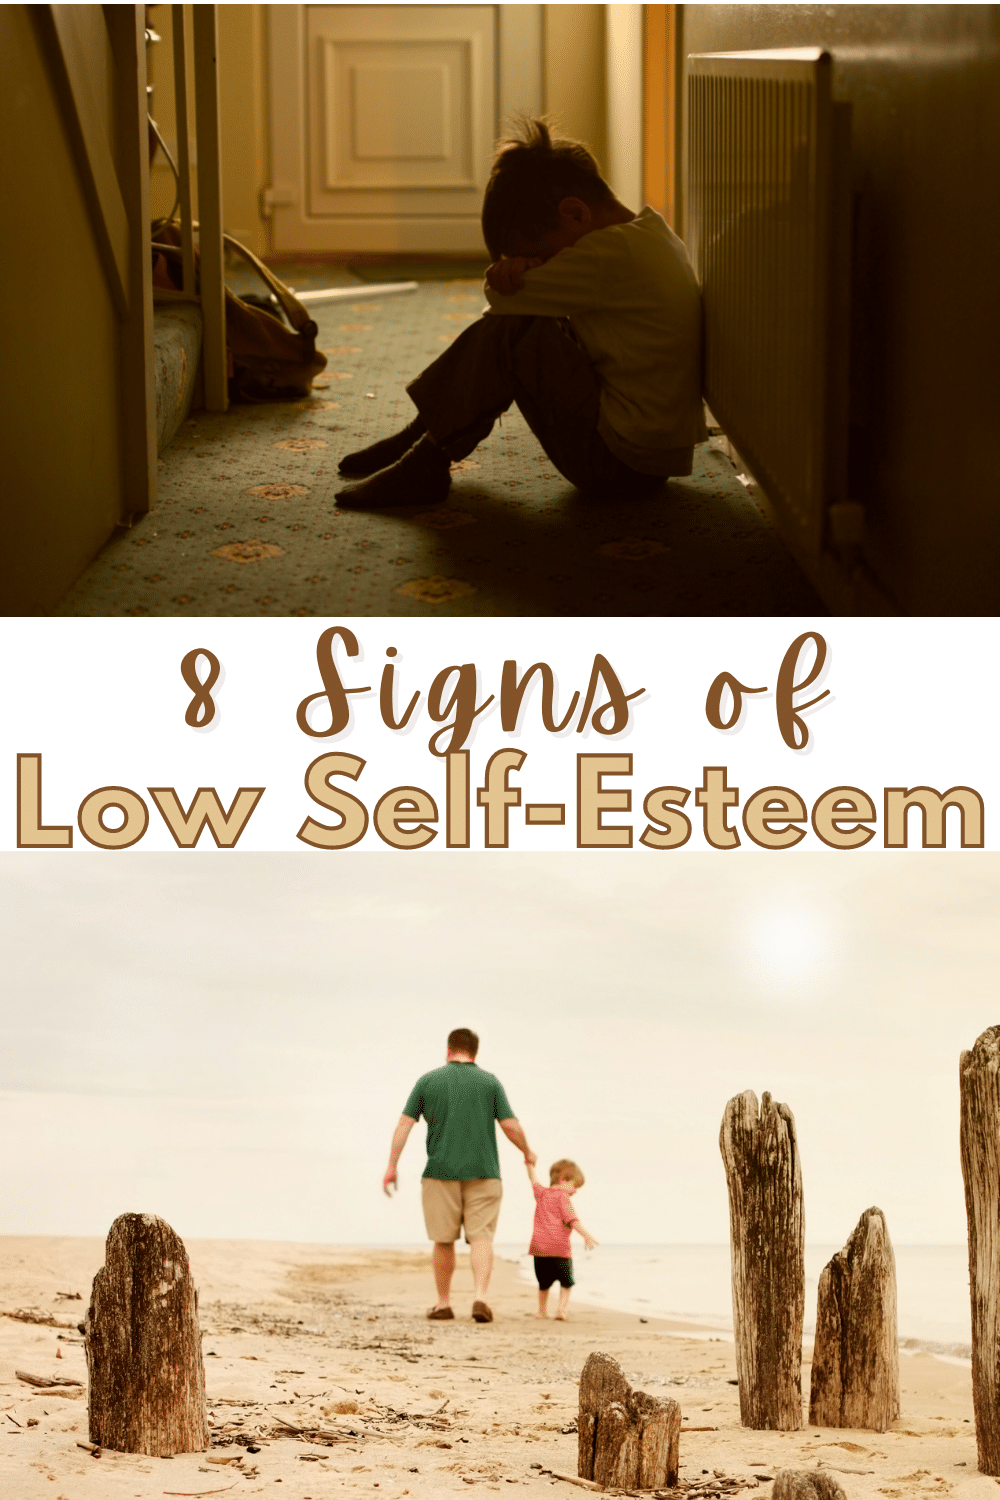 Watch for these signs of low self esteem in your child so you know when to step in and help or seek professional assistance. #selfesteem #parentingtips #mentalhealth via @wondermomwannab